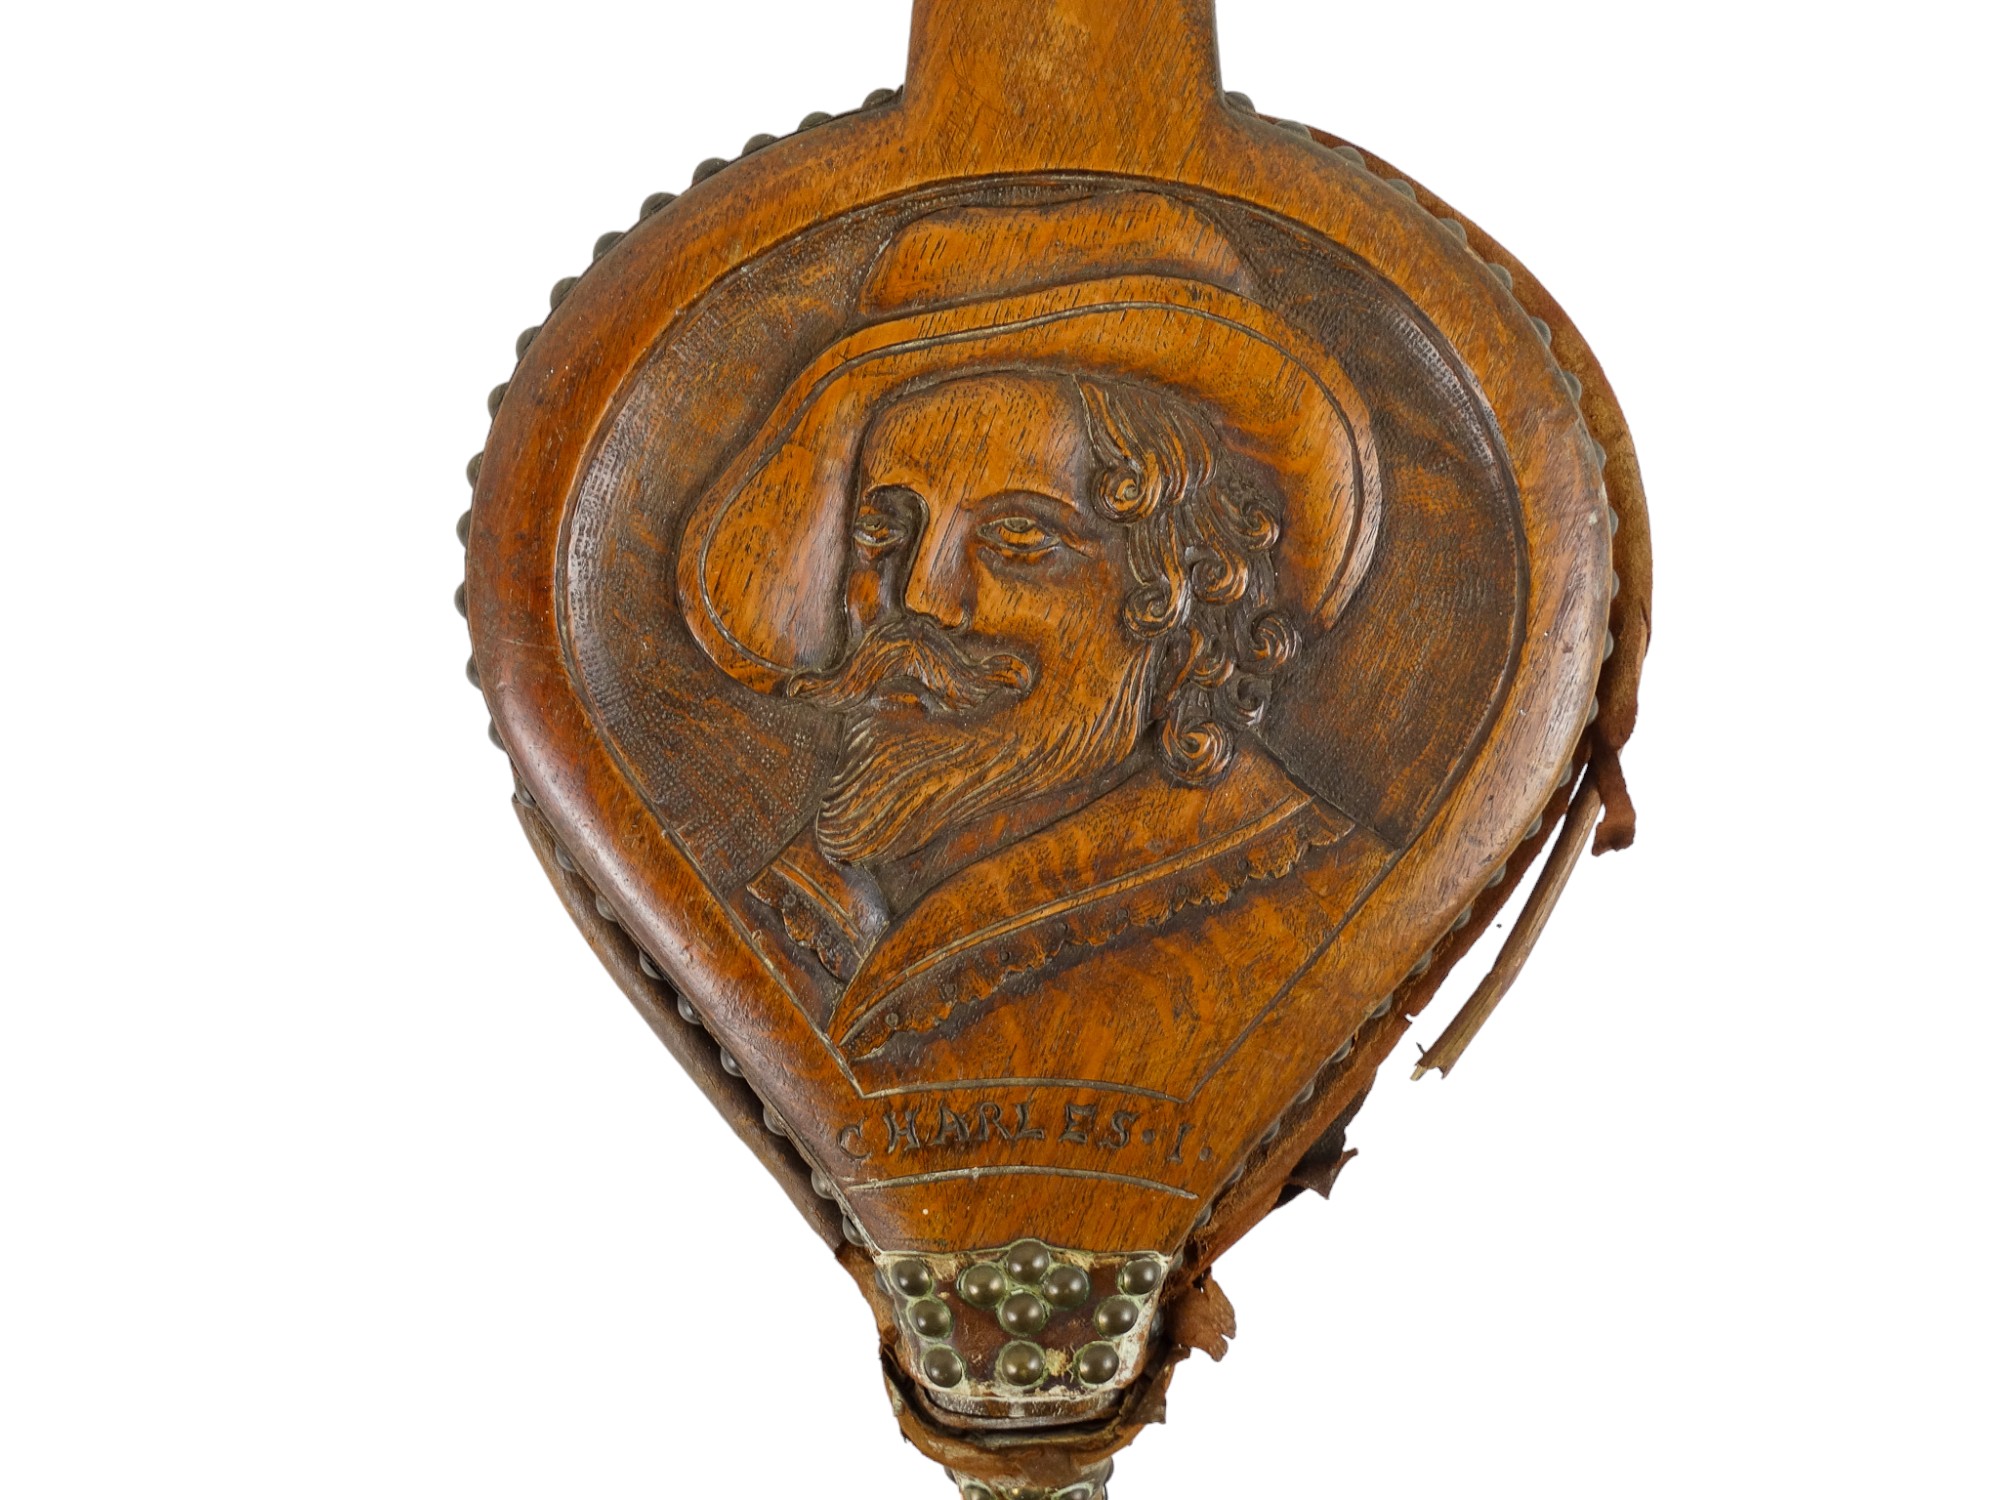 A pair of early 20th century wooden bellows - carved with a profile portrait of Charles I and with a - Image 2 of 5